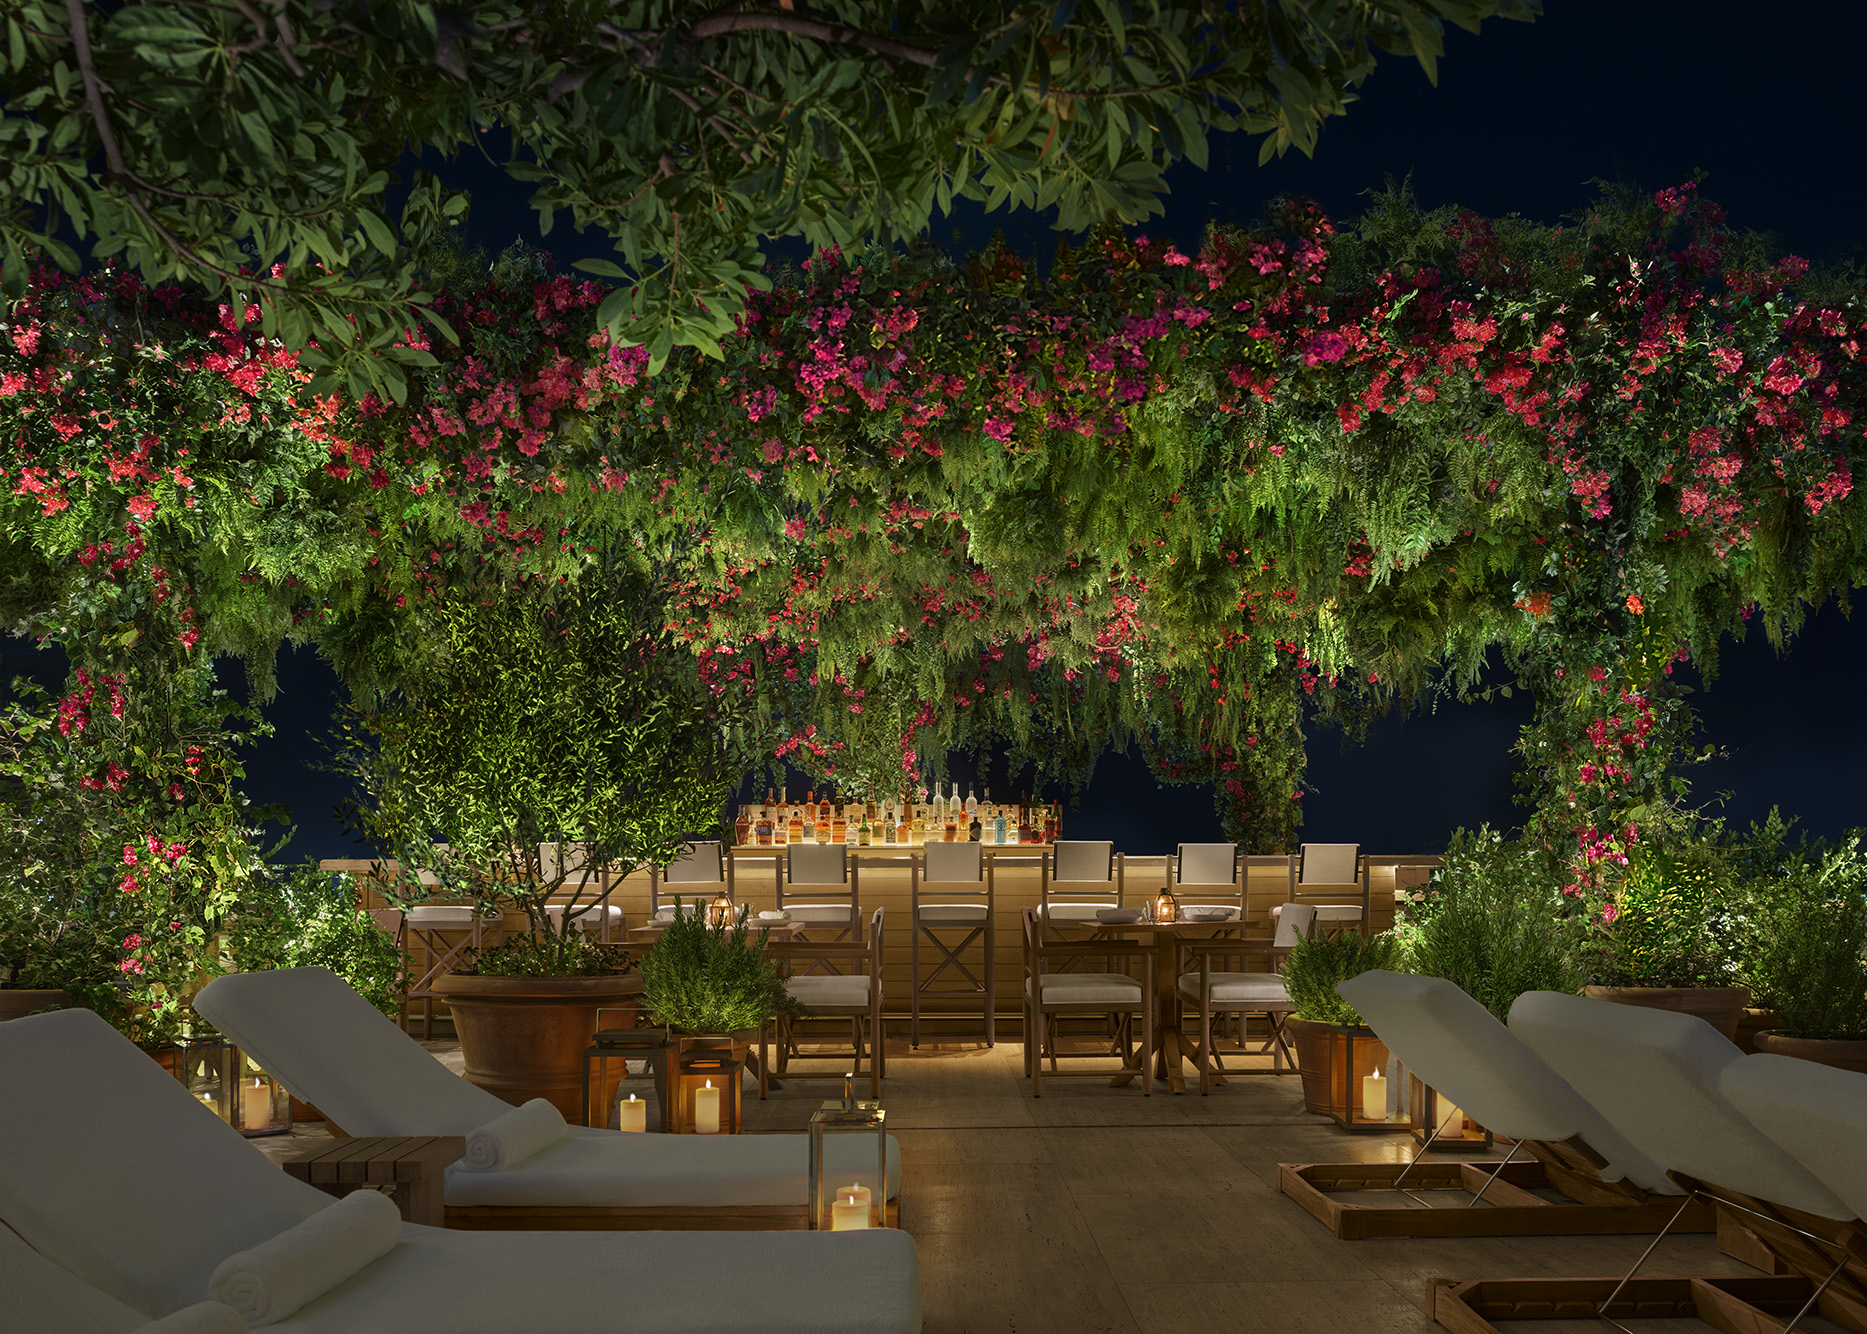 Tropical vines and flora growing over the pool bar